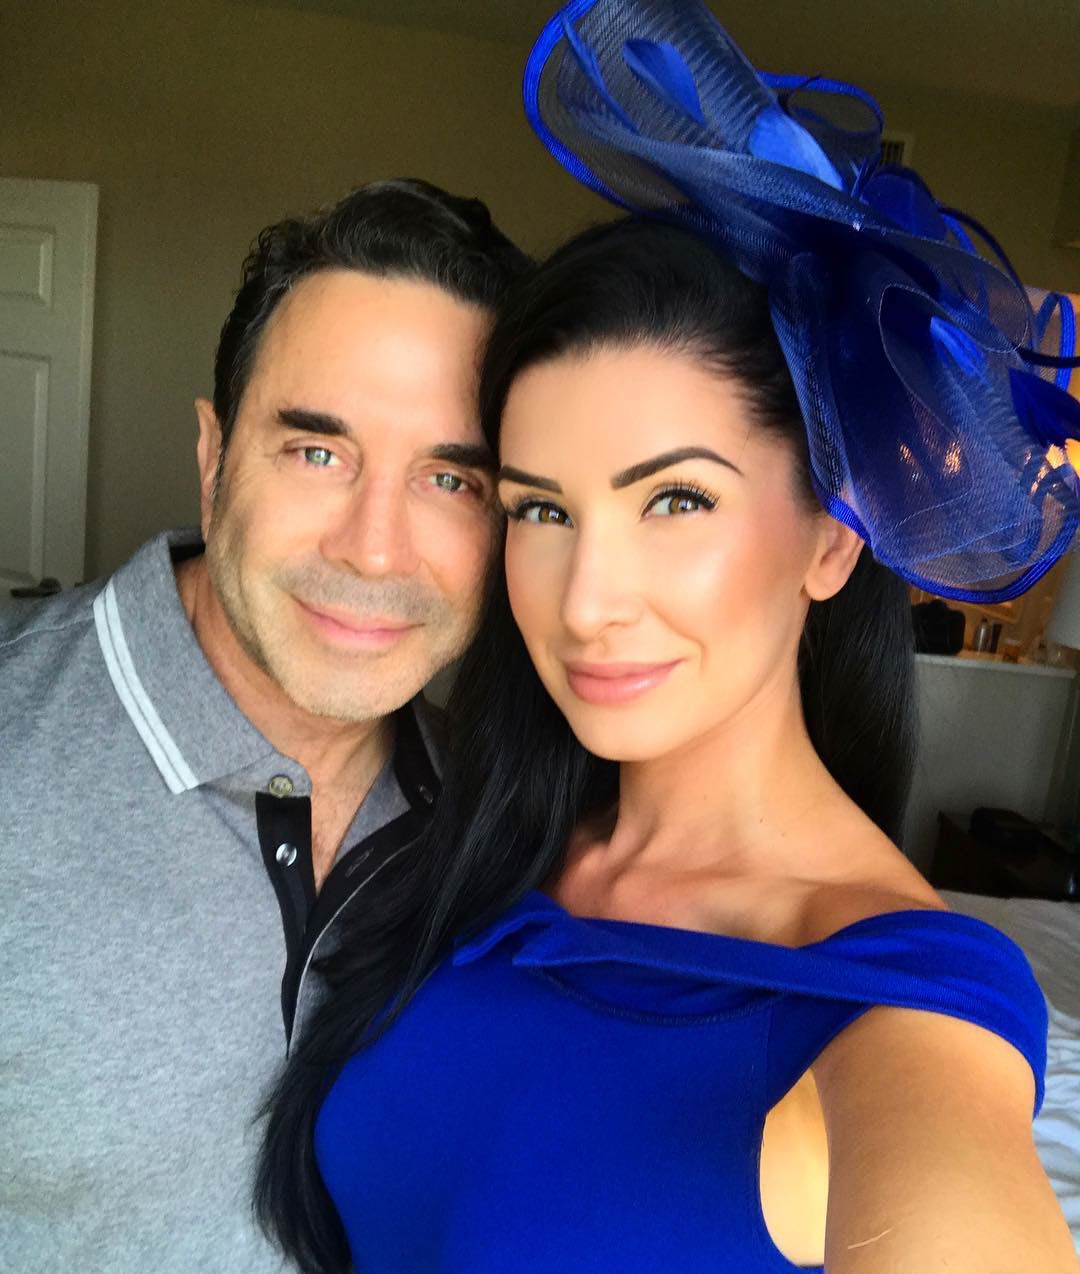 Dr Paul Nassif And Brittany Pattakos